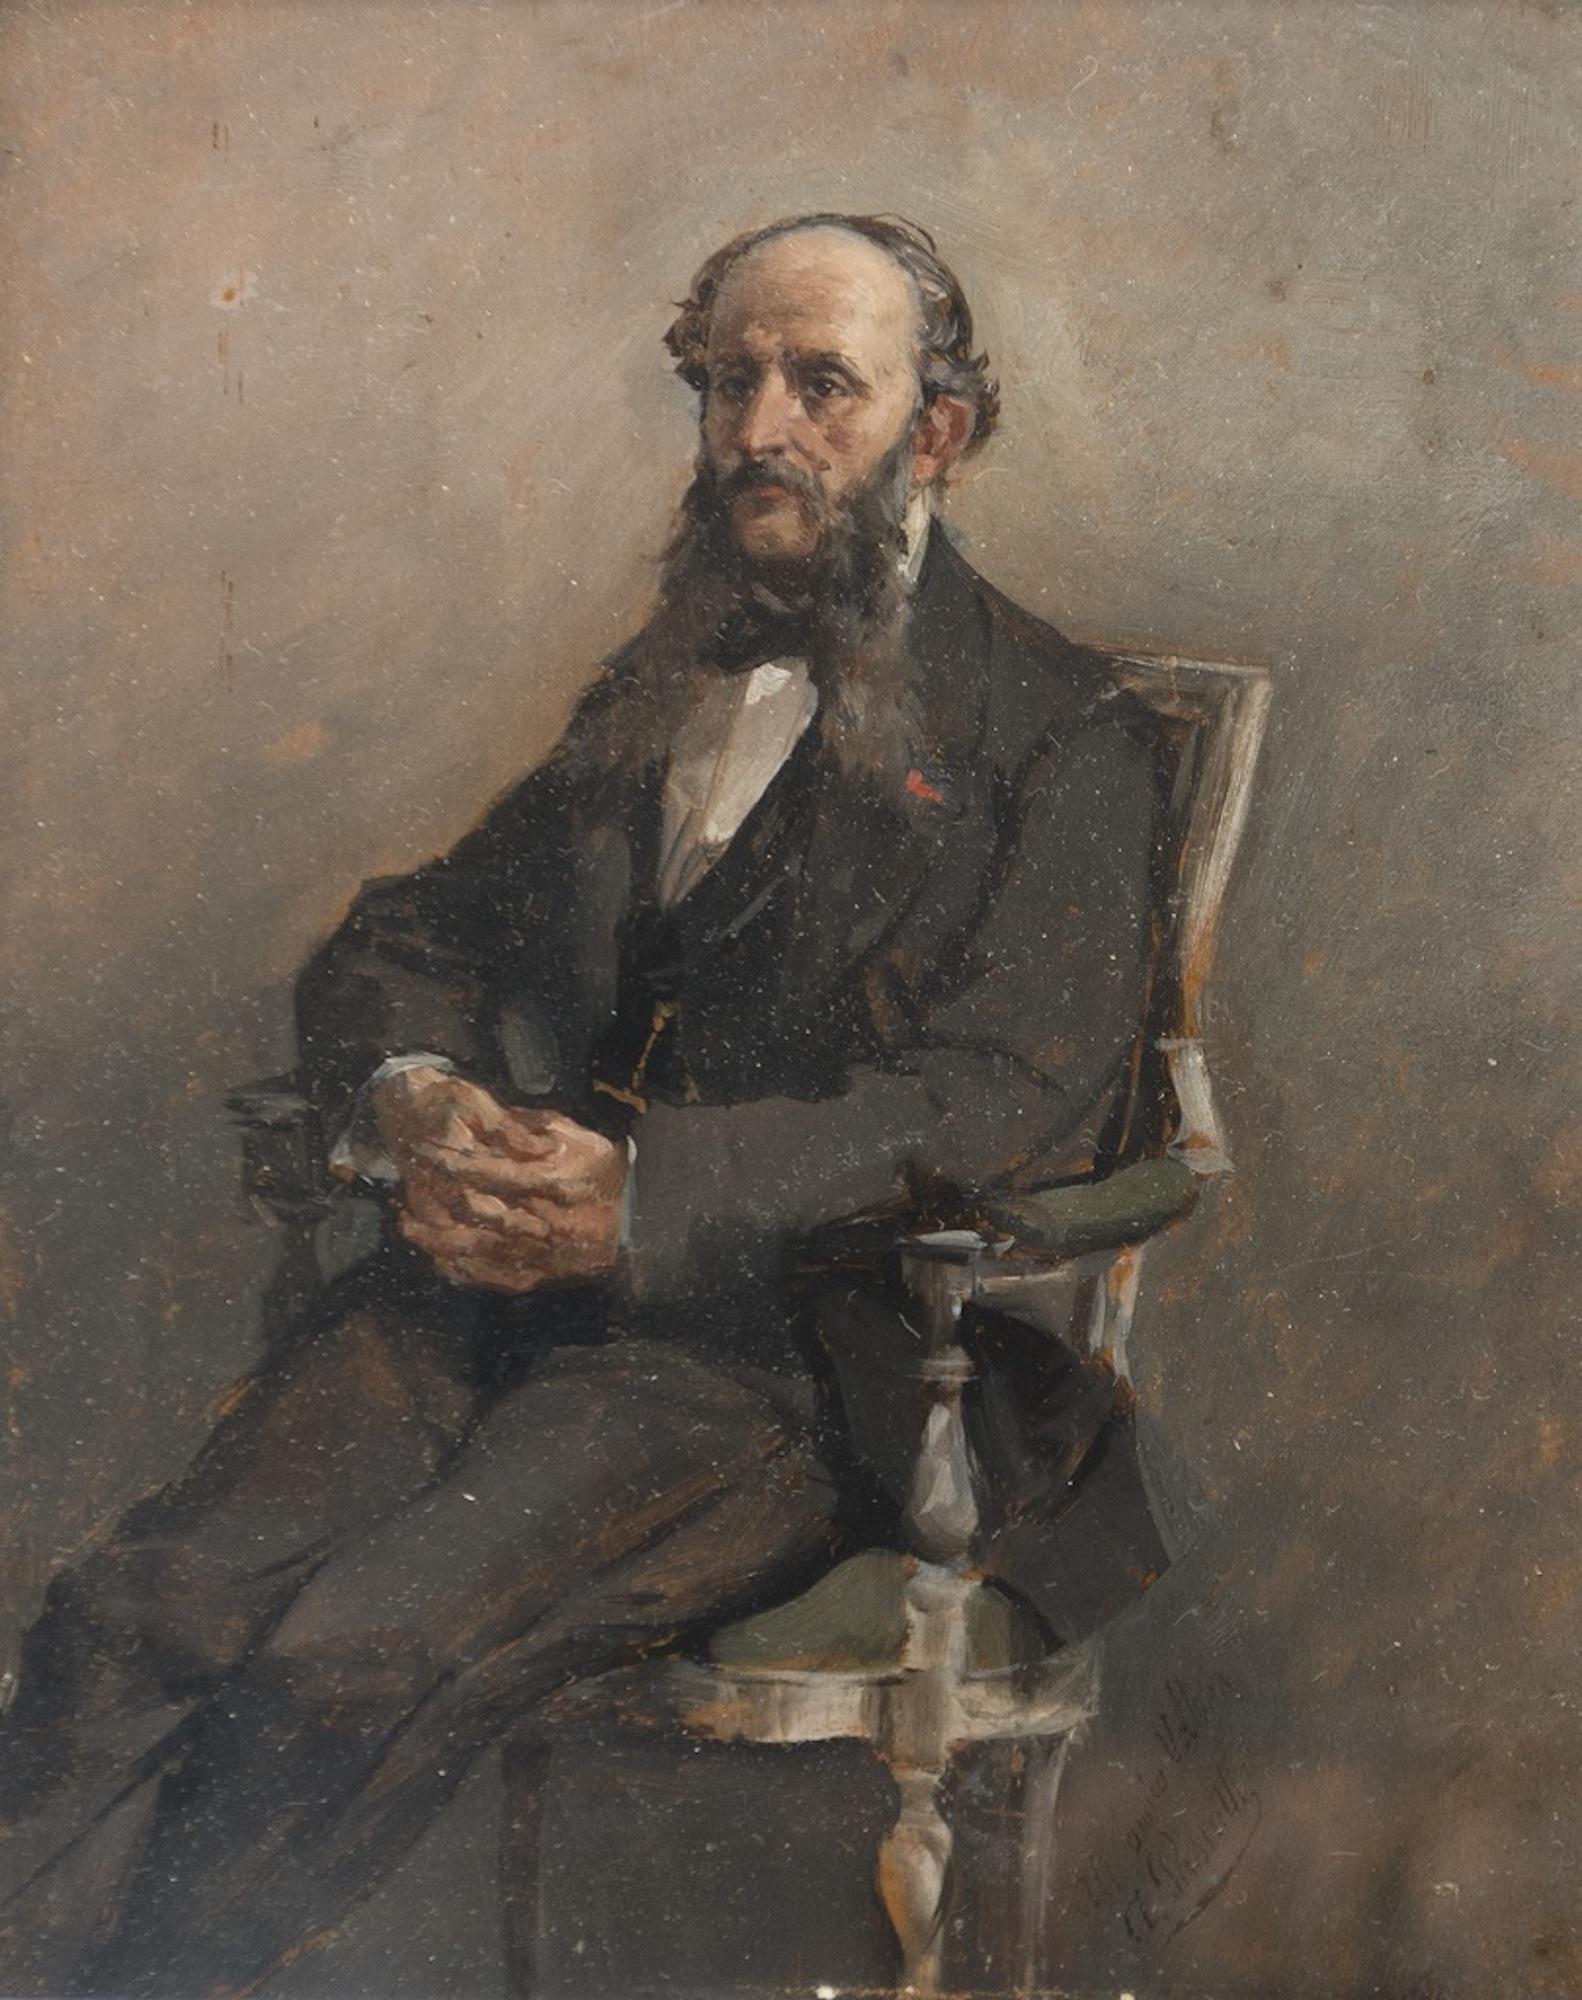 Antonio Pascutti Portrait Painting - Portrait of Seated Man - Oil on Canvas by A. Pascutti - 1870s